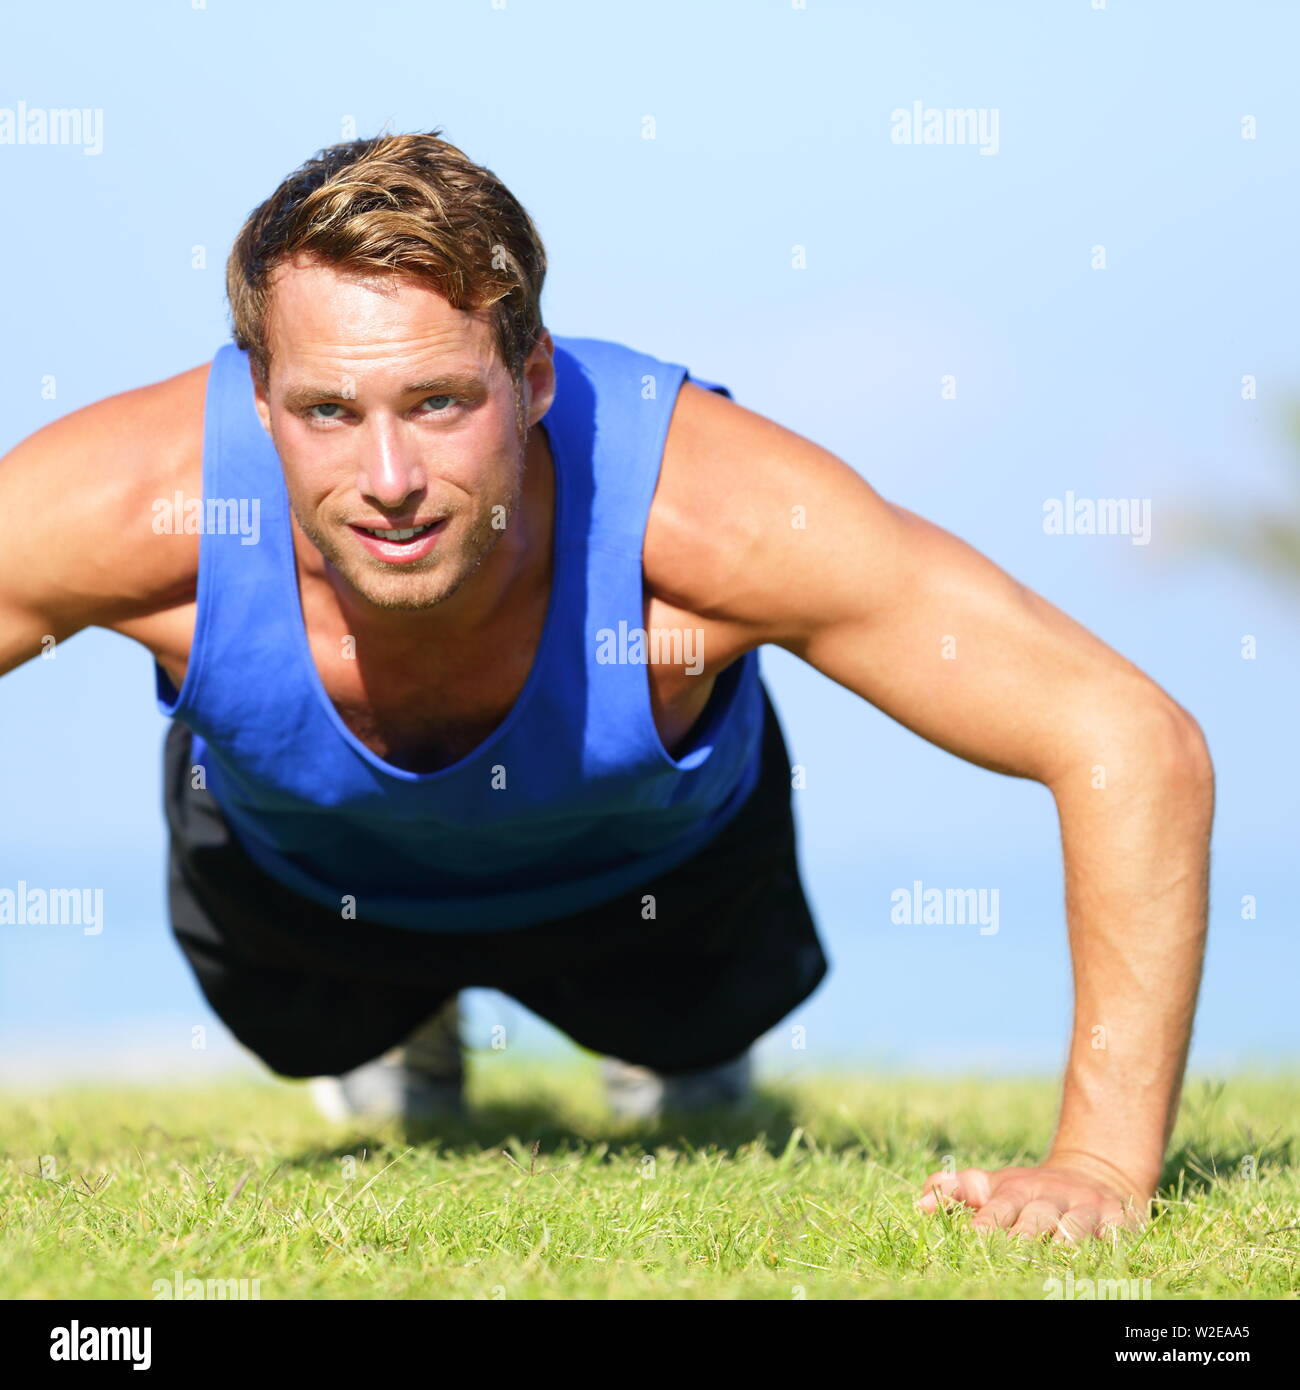 Push ups - fitness man exercising push up outside in grass in summer. Fit male athlete working out cross training outdoor. Caucasian muscular sports model in his 20s. Stock Photo